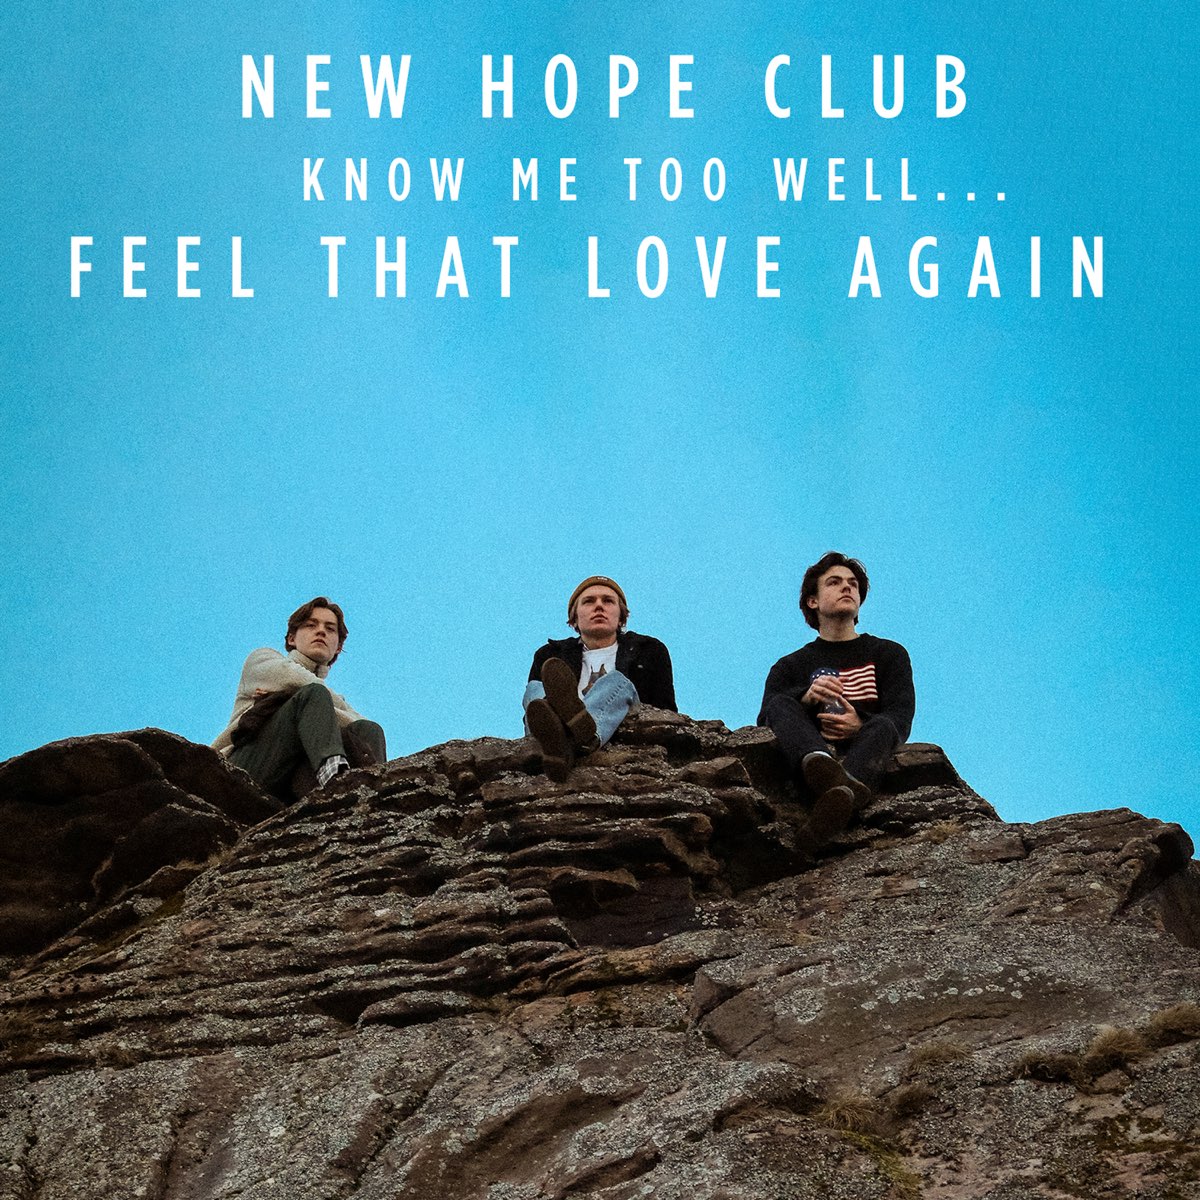 Know Me Too Well - EP by New Hope Club on Apple Music